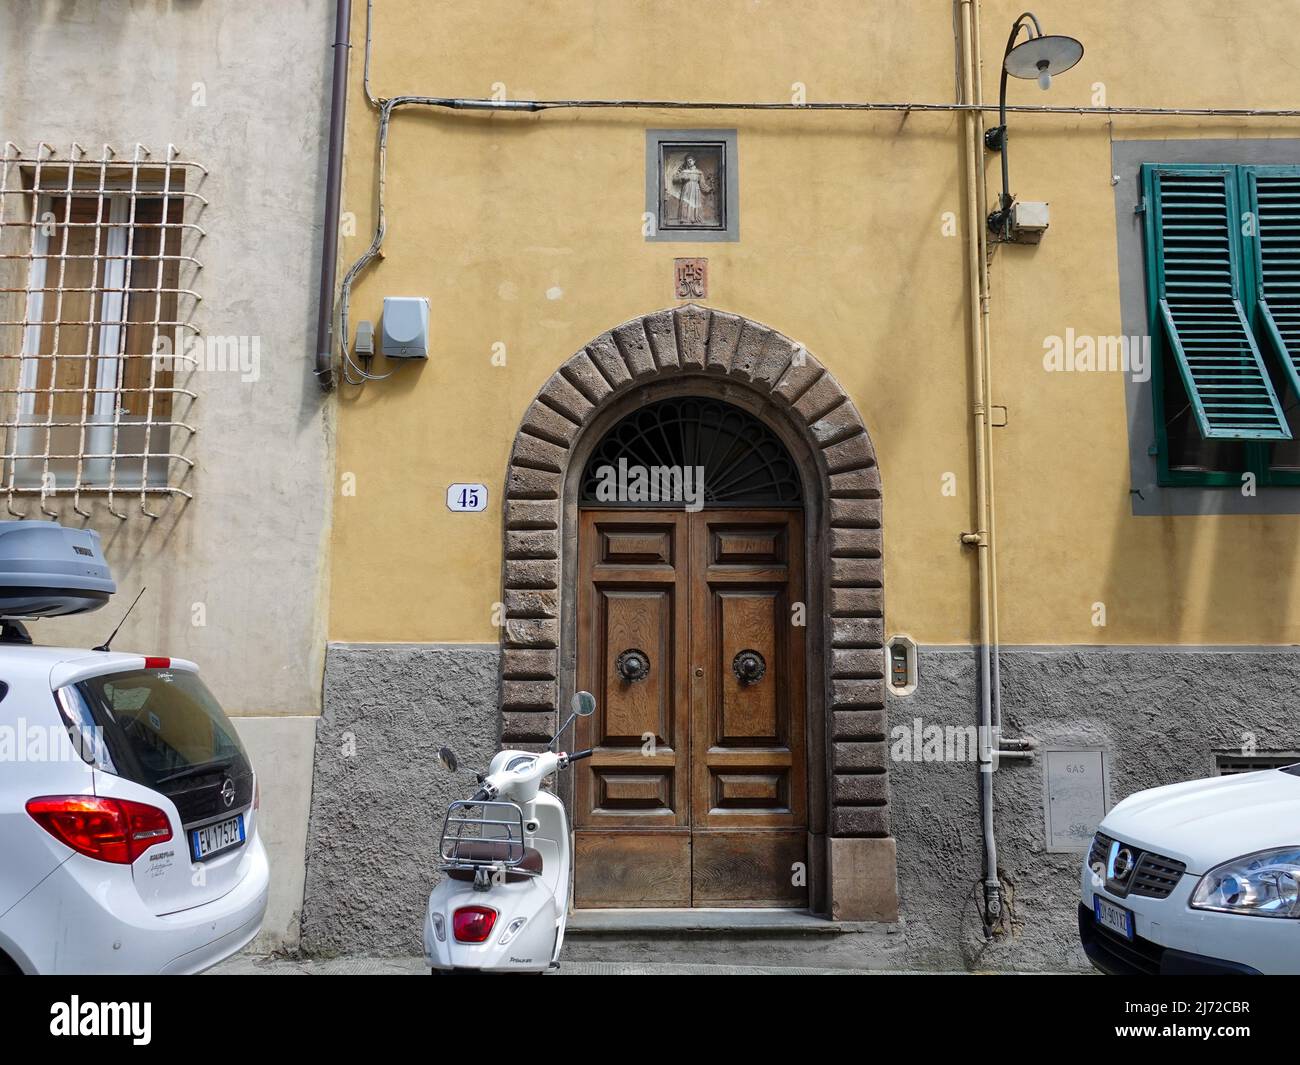 Religious, Christian symbols over doorway entrance to residential building  in Lucca, Italy. Stock Photo